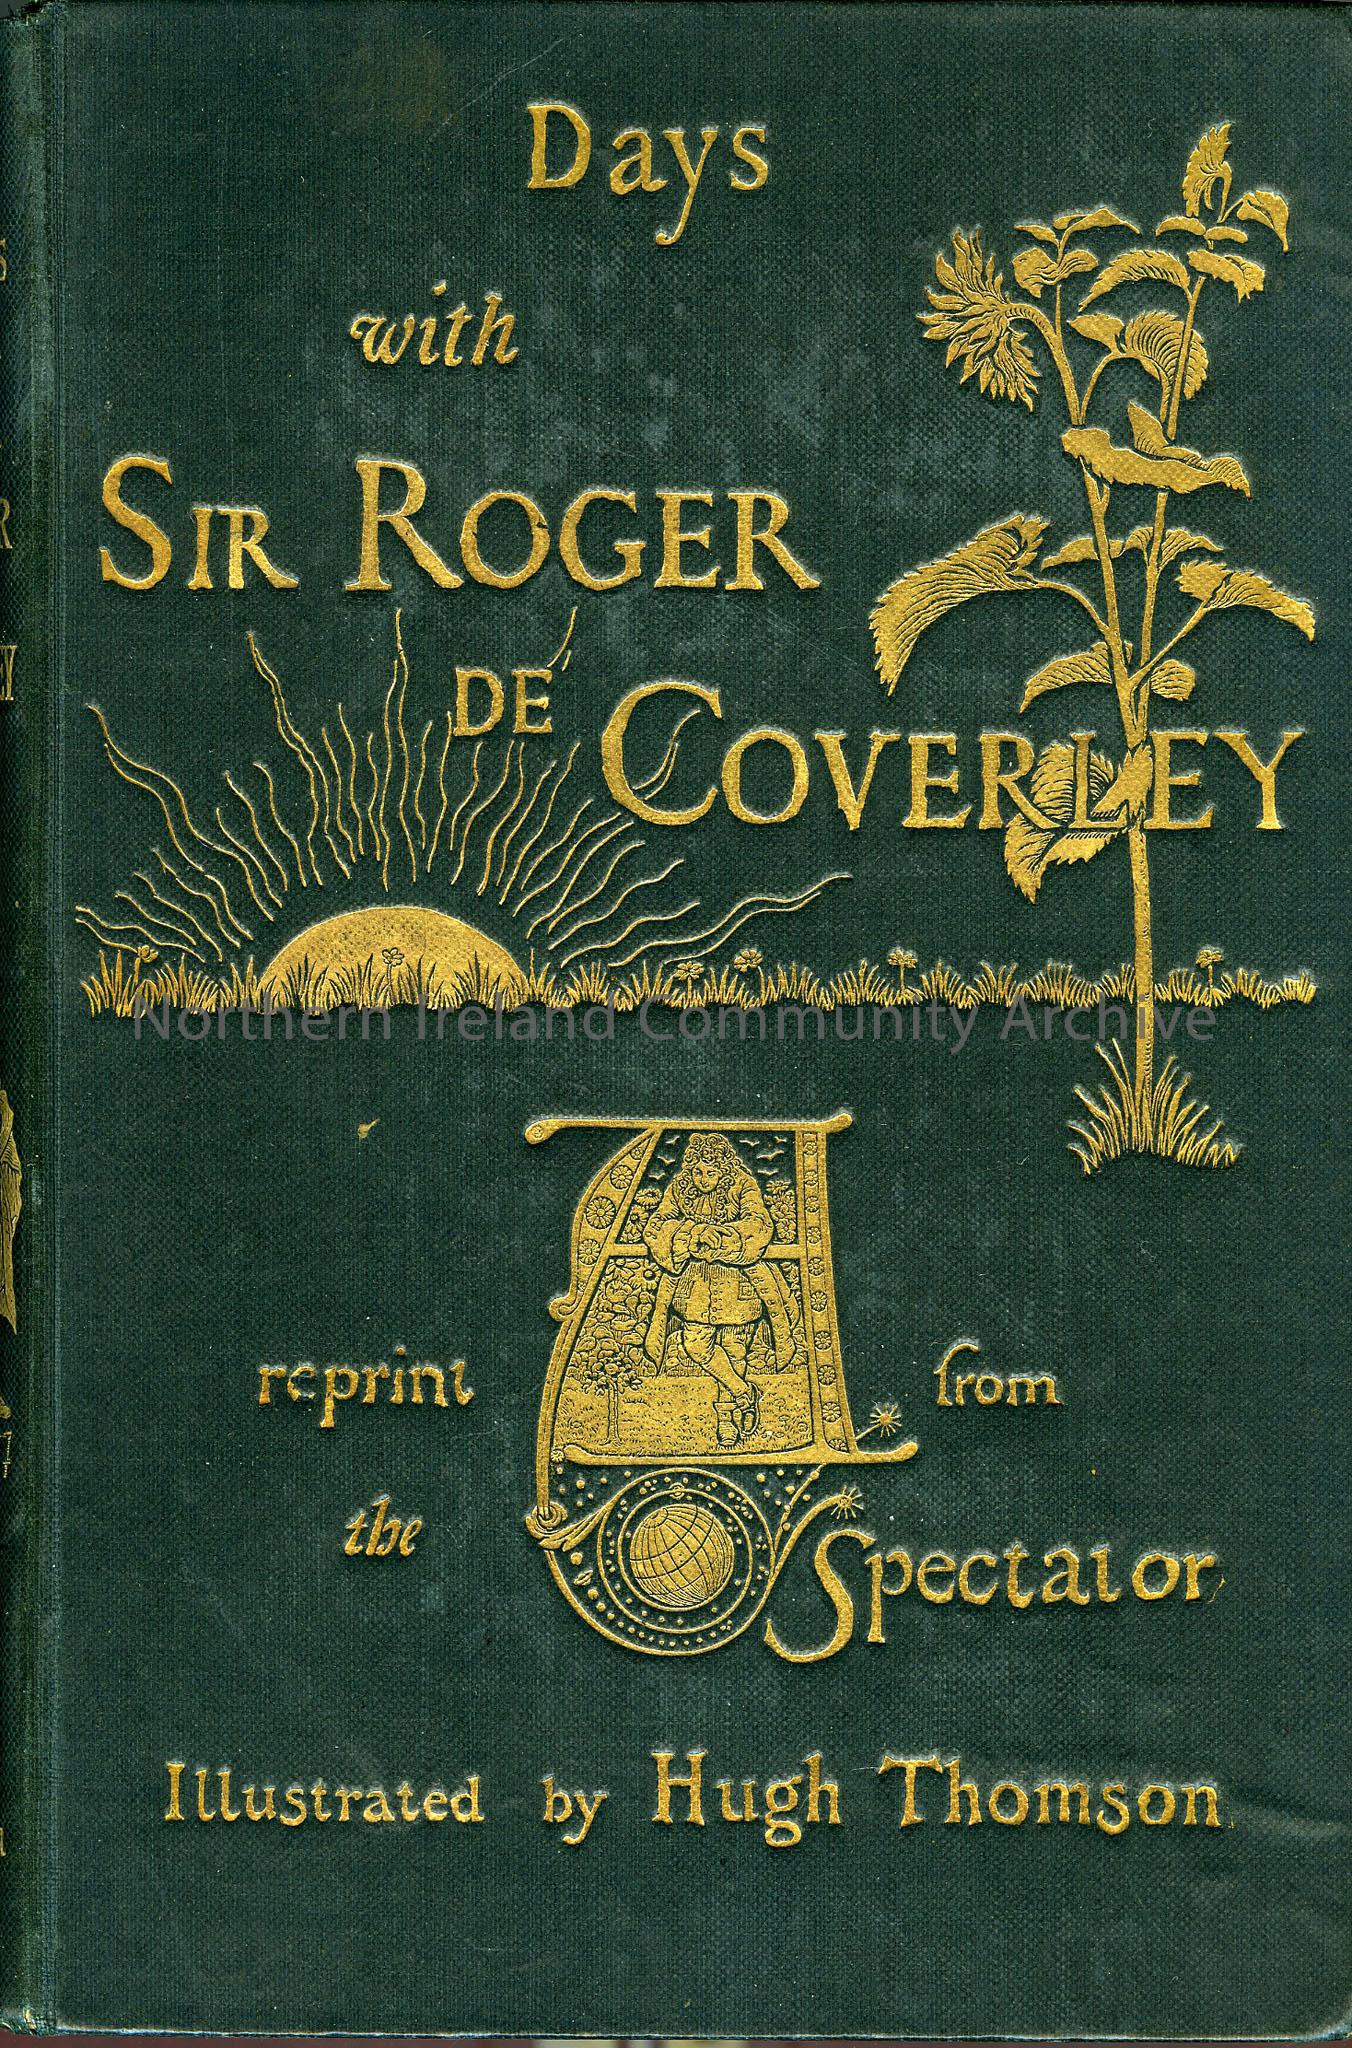 ‘Days with Sir Roger de Coverley’ a reprint from ‘The Spectator’ illustrated by Hugh Thomson